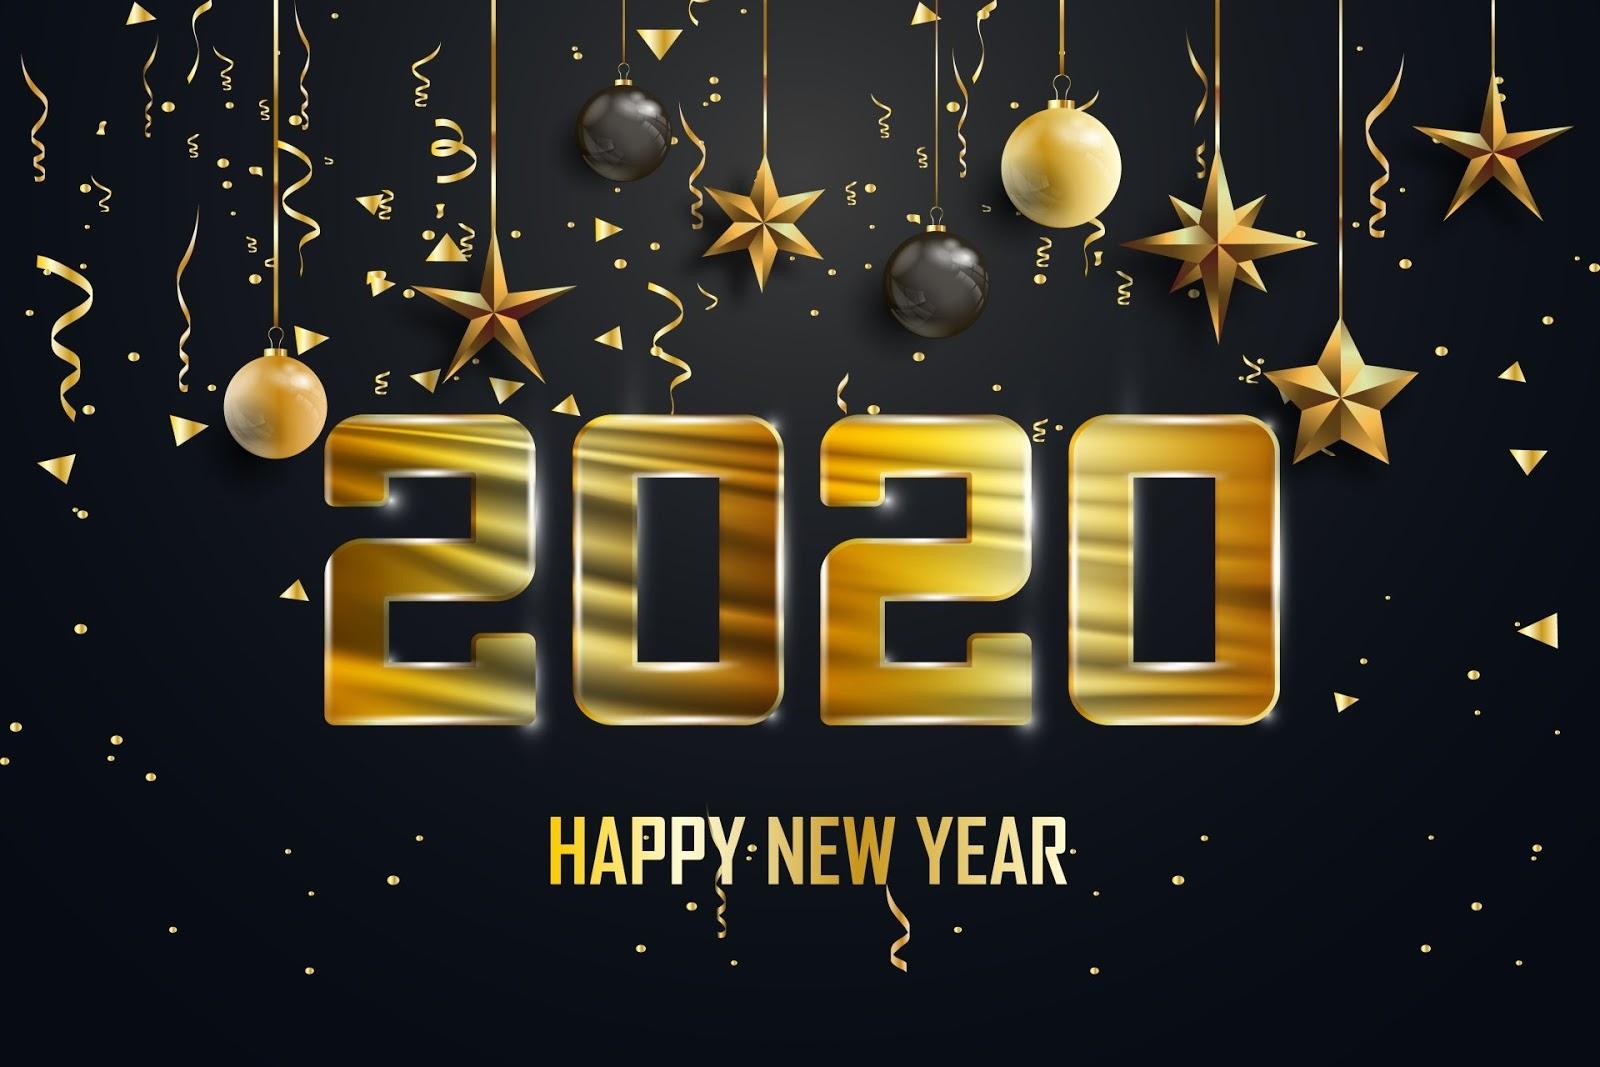 The Info All, Happy new year 2020 wallpaper